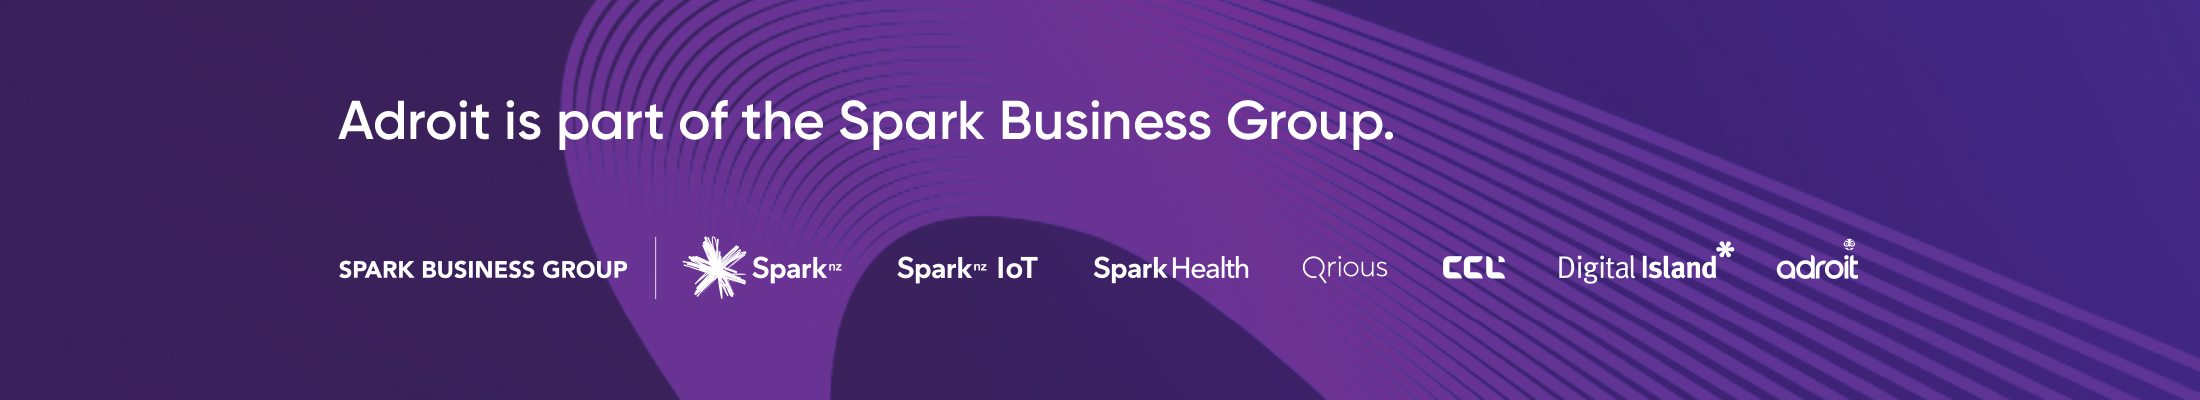 Spark Business Group includes Adroit